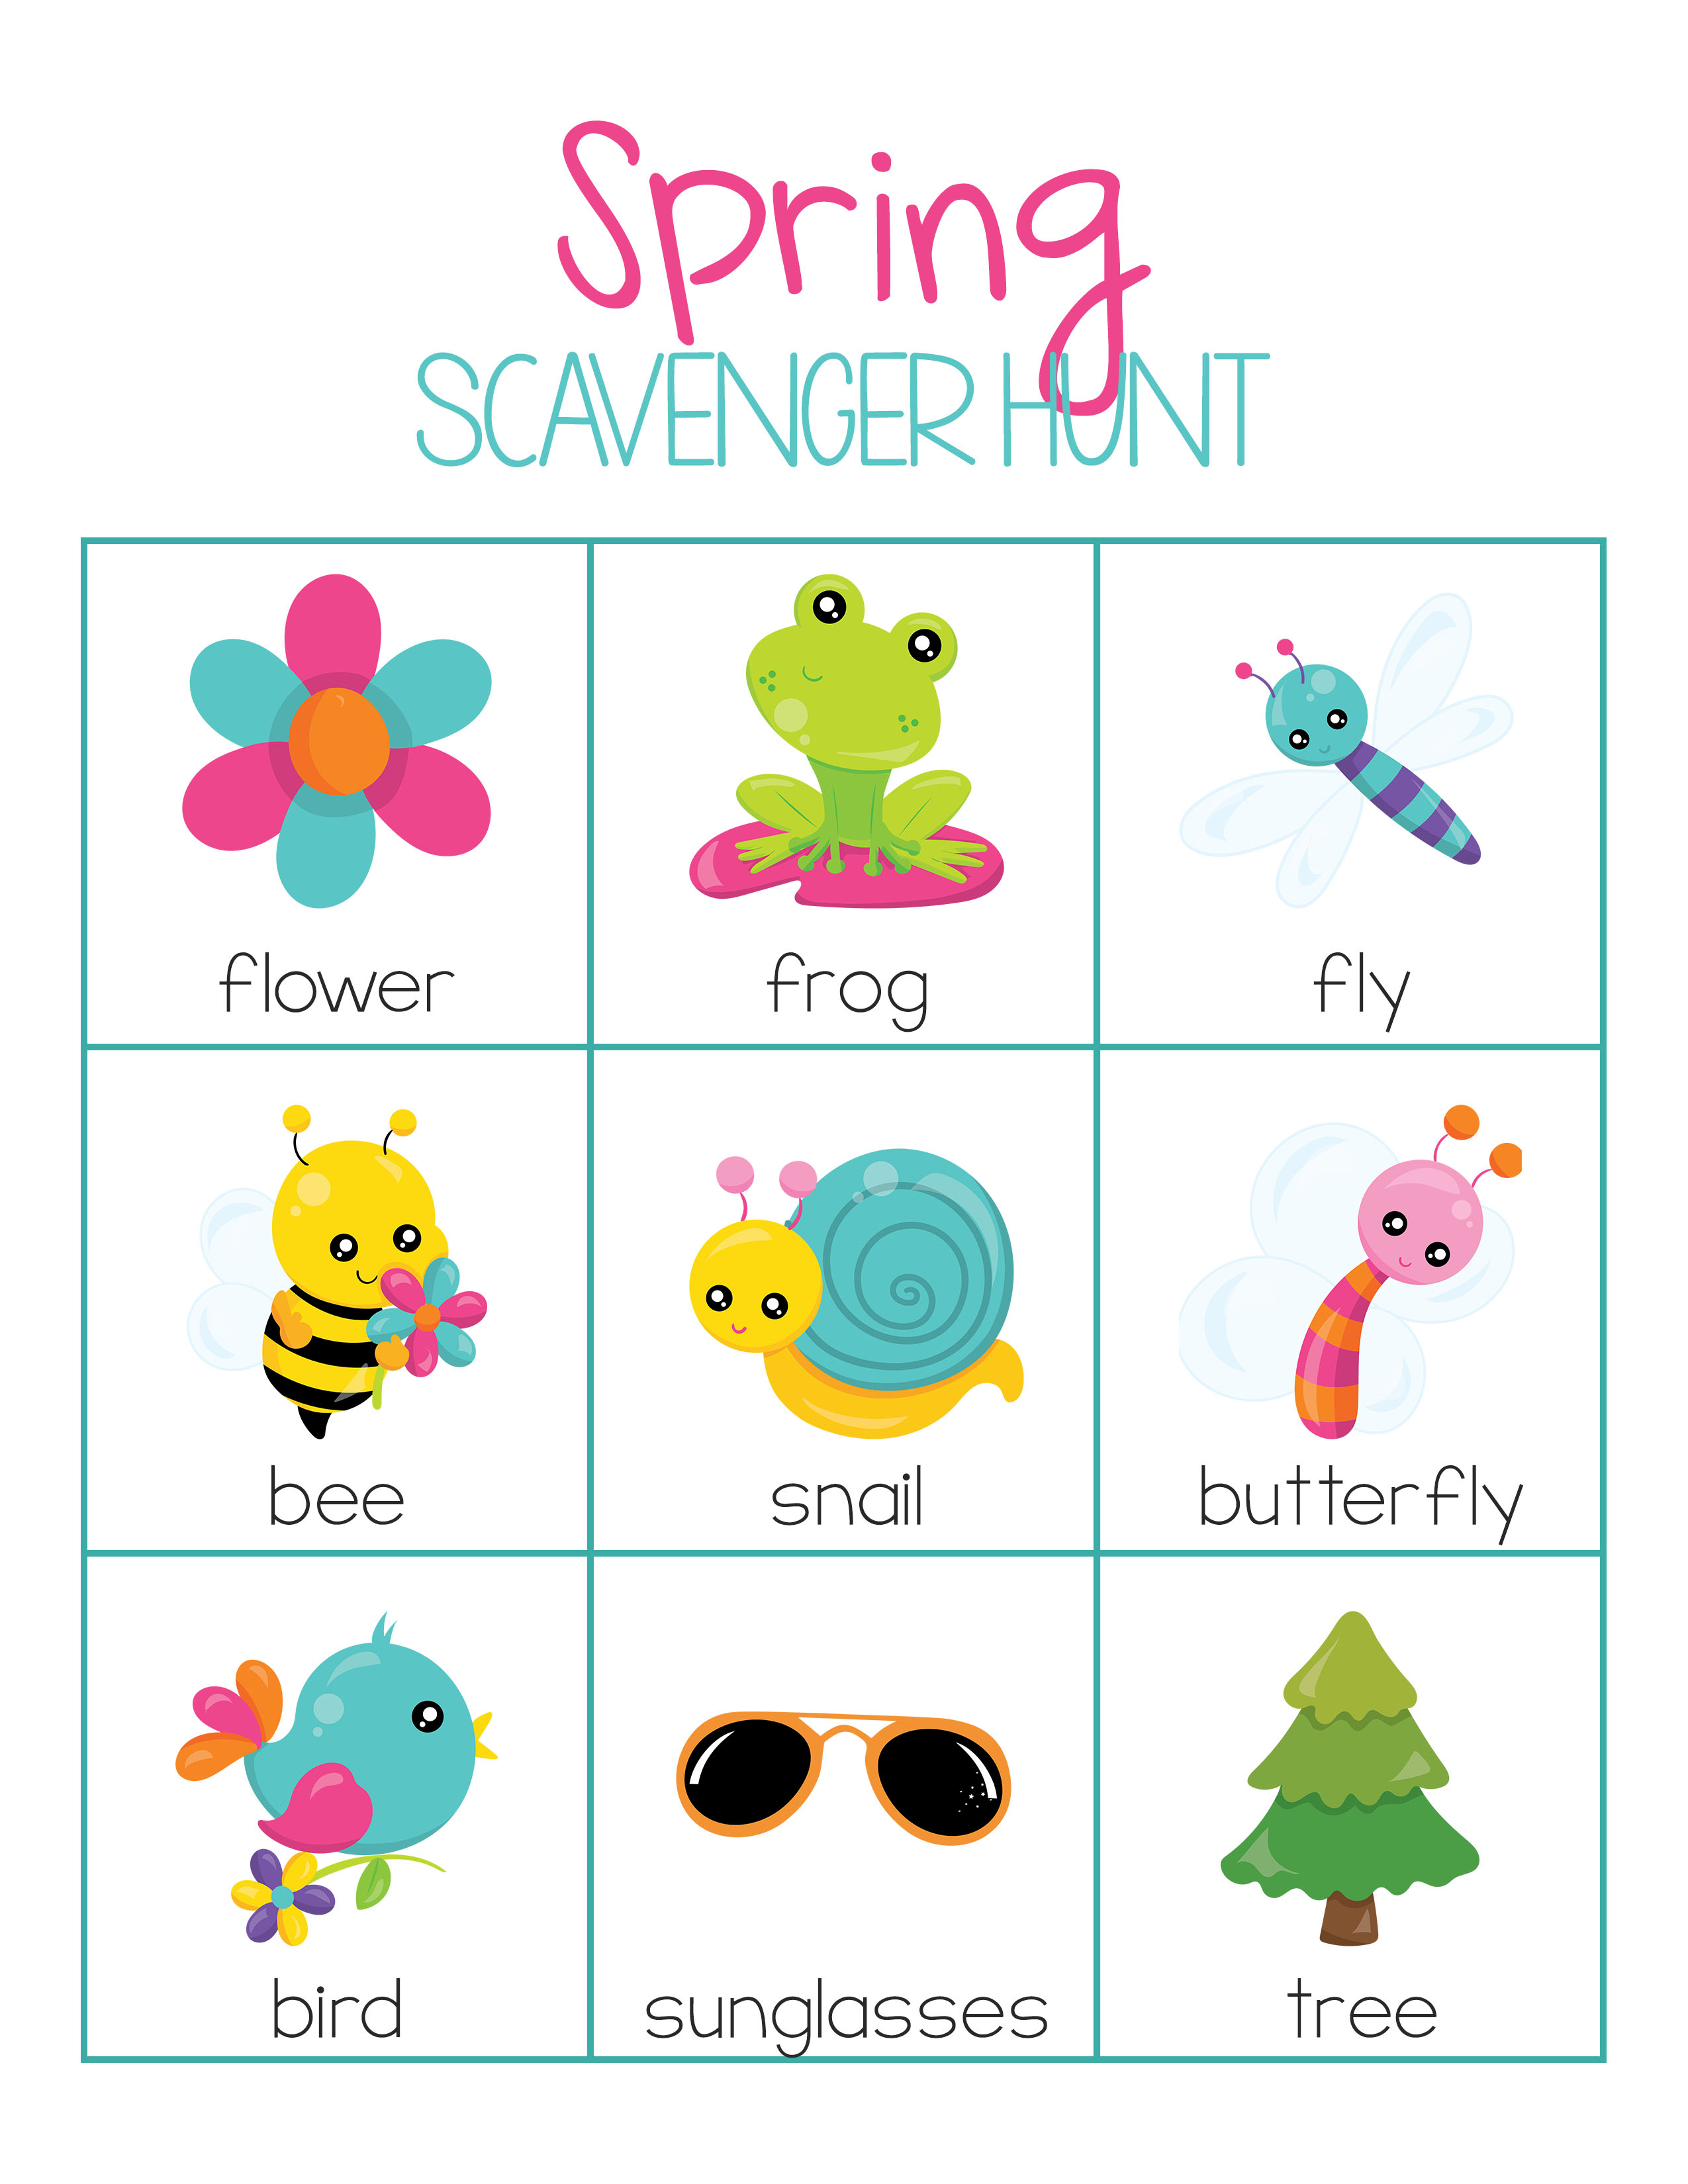 Celebrate spring with this free spring activities pack for preschool and kindergarten! Practice math, literacy, and go on a spring nature scavenger hunt.